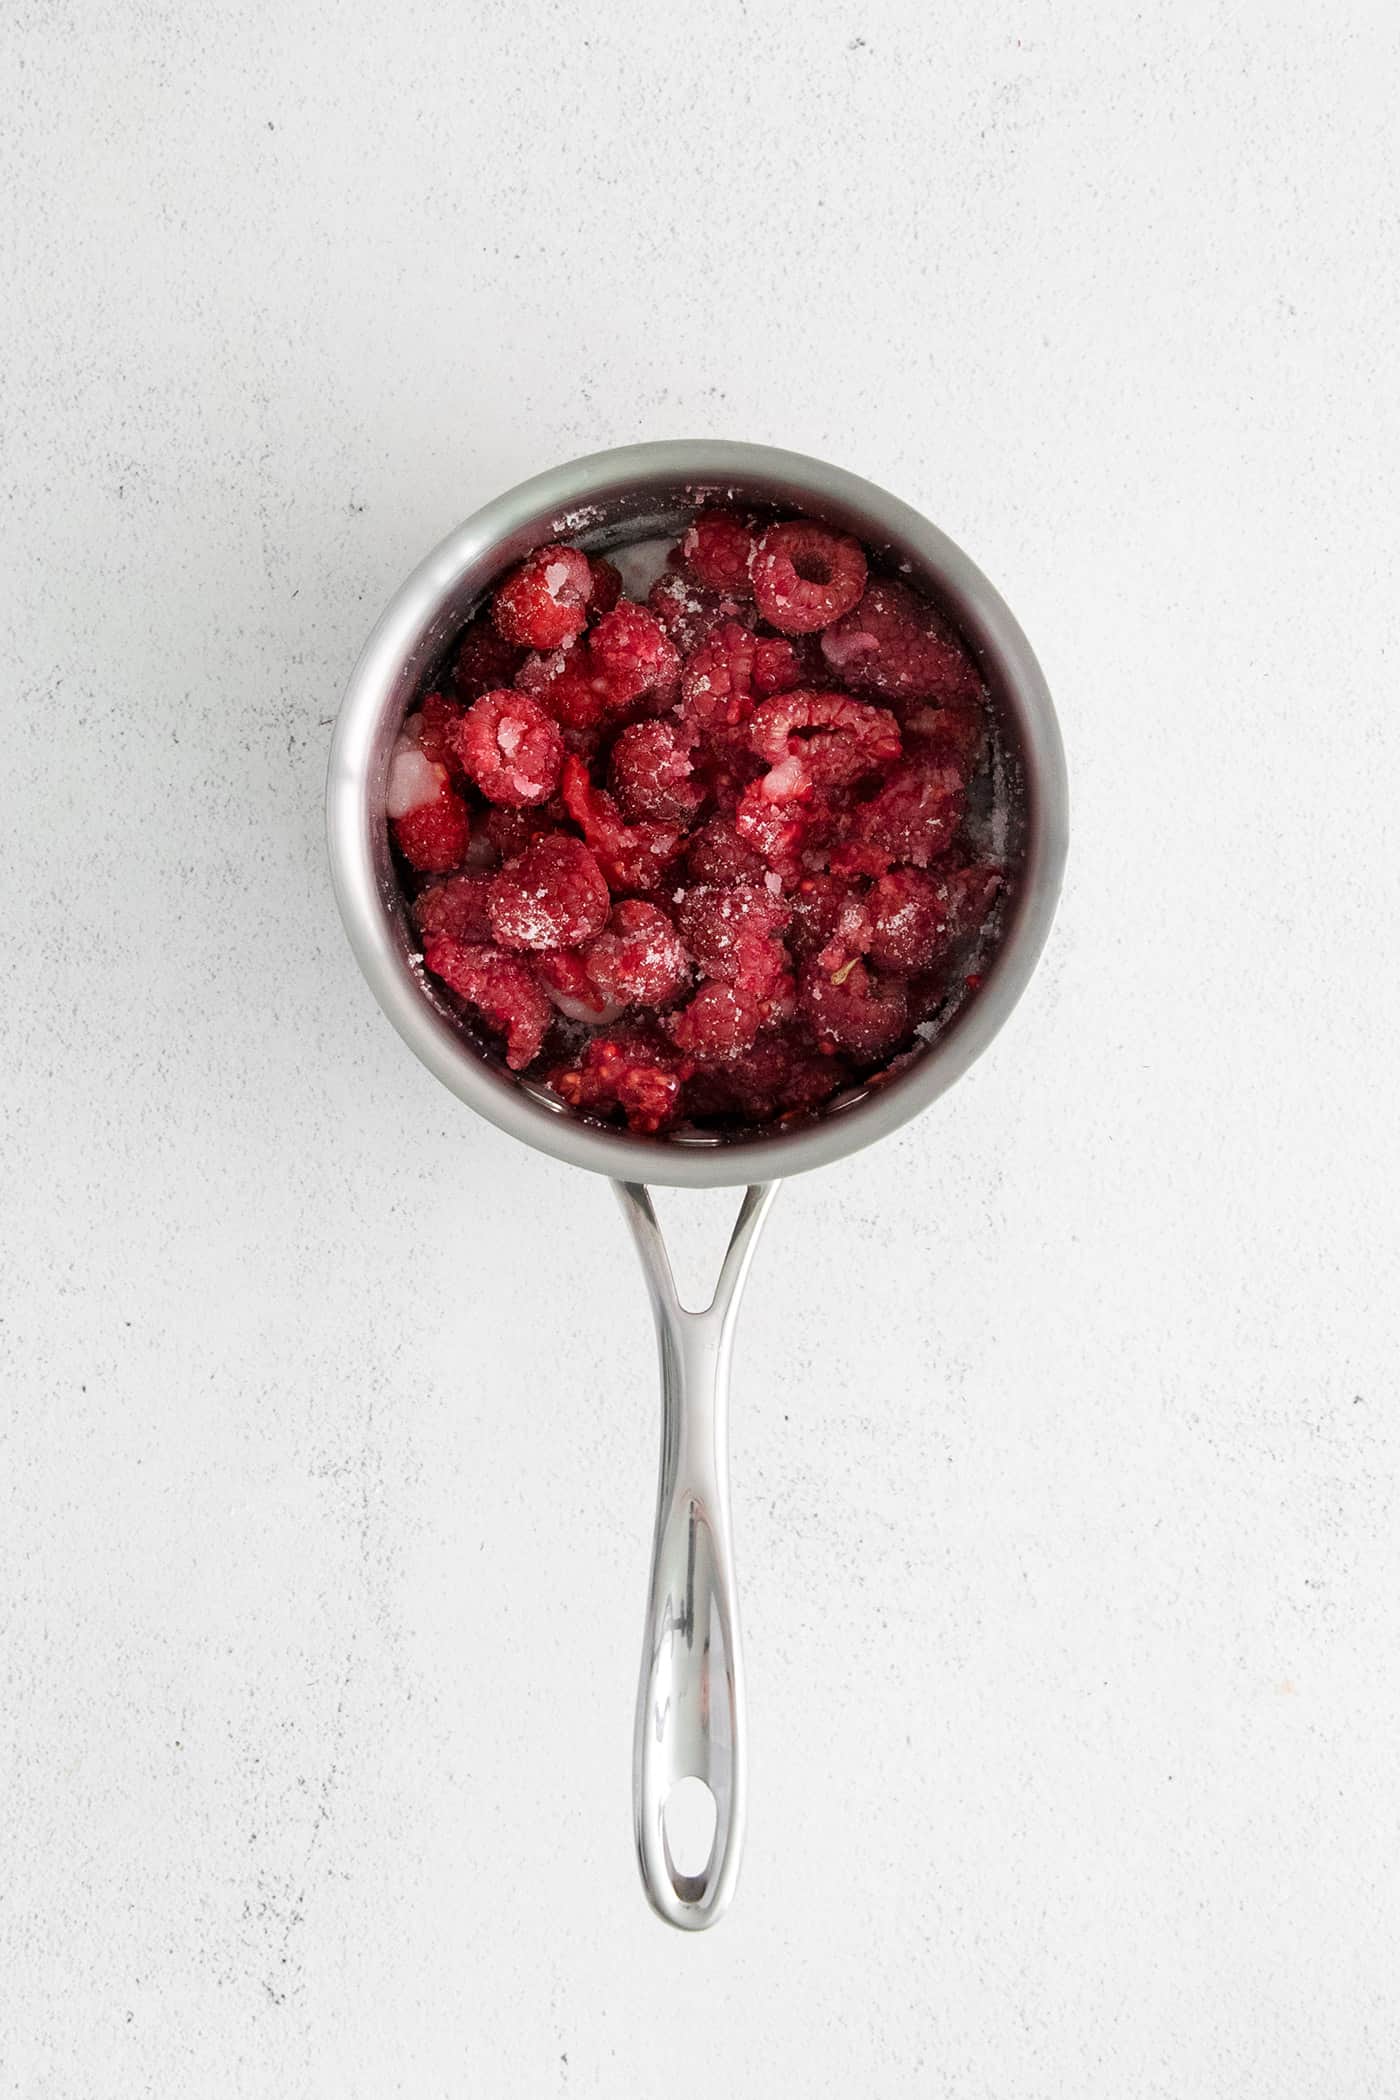 Raspberries with lime juice and sugar in a sauce pan